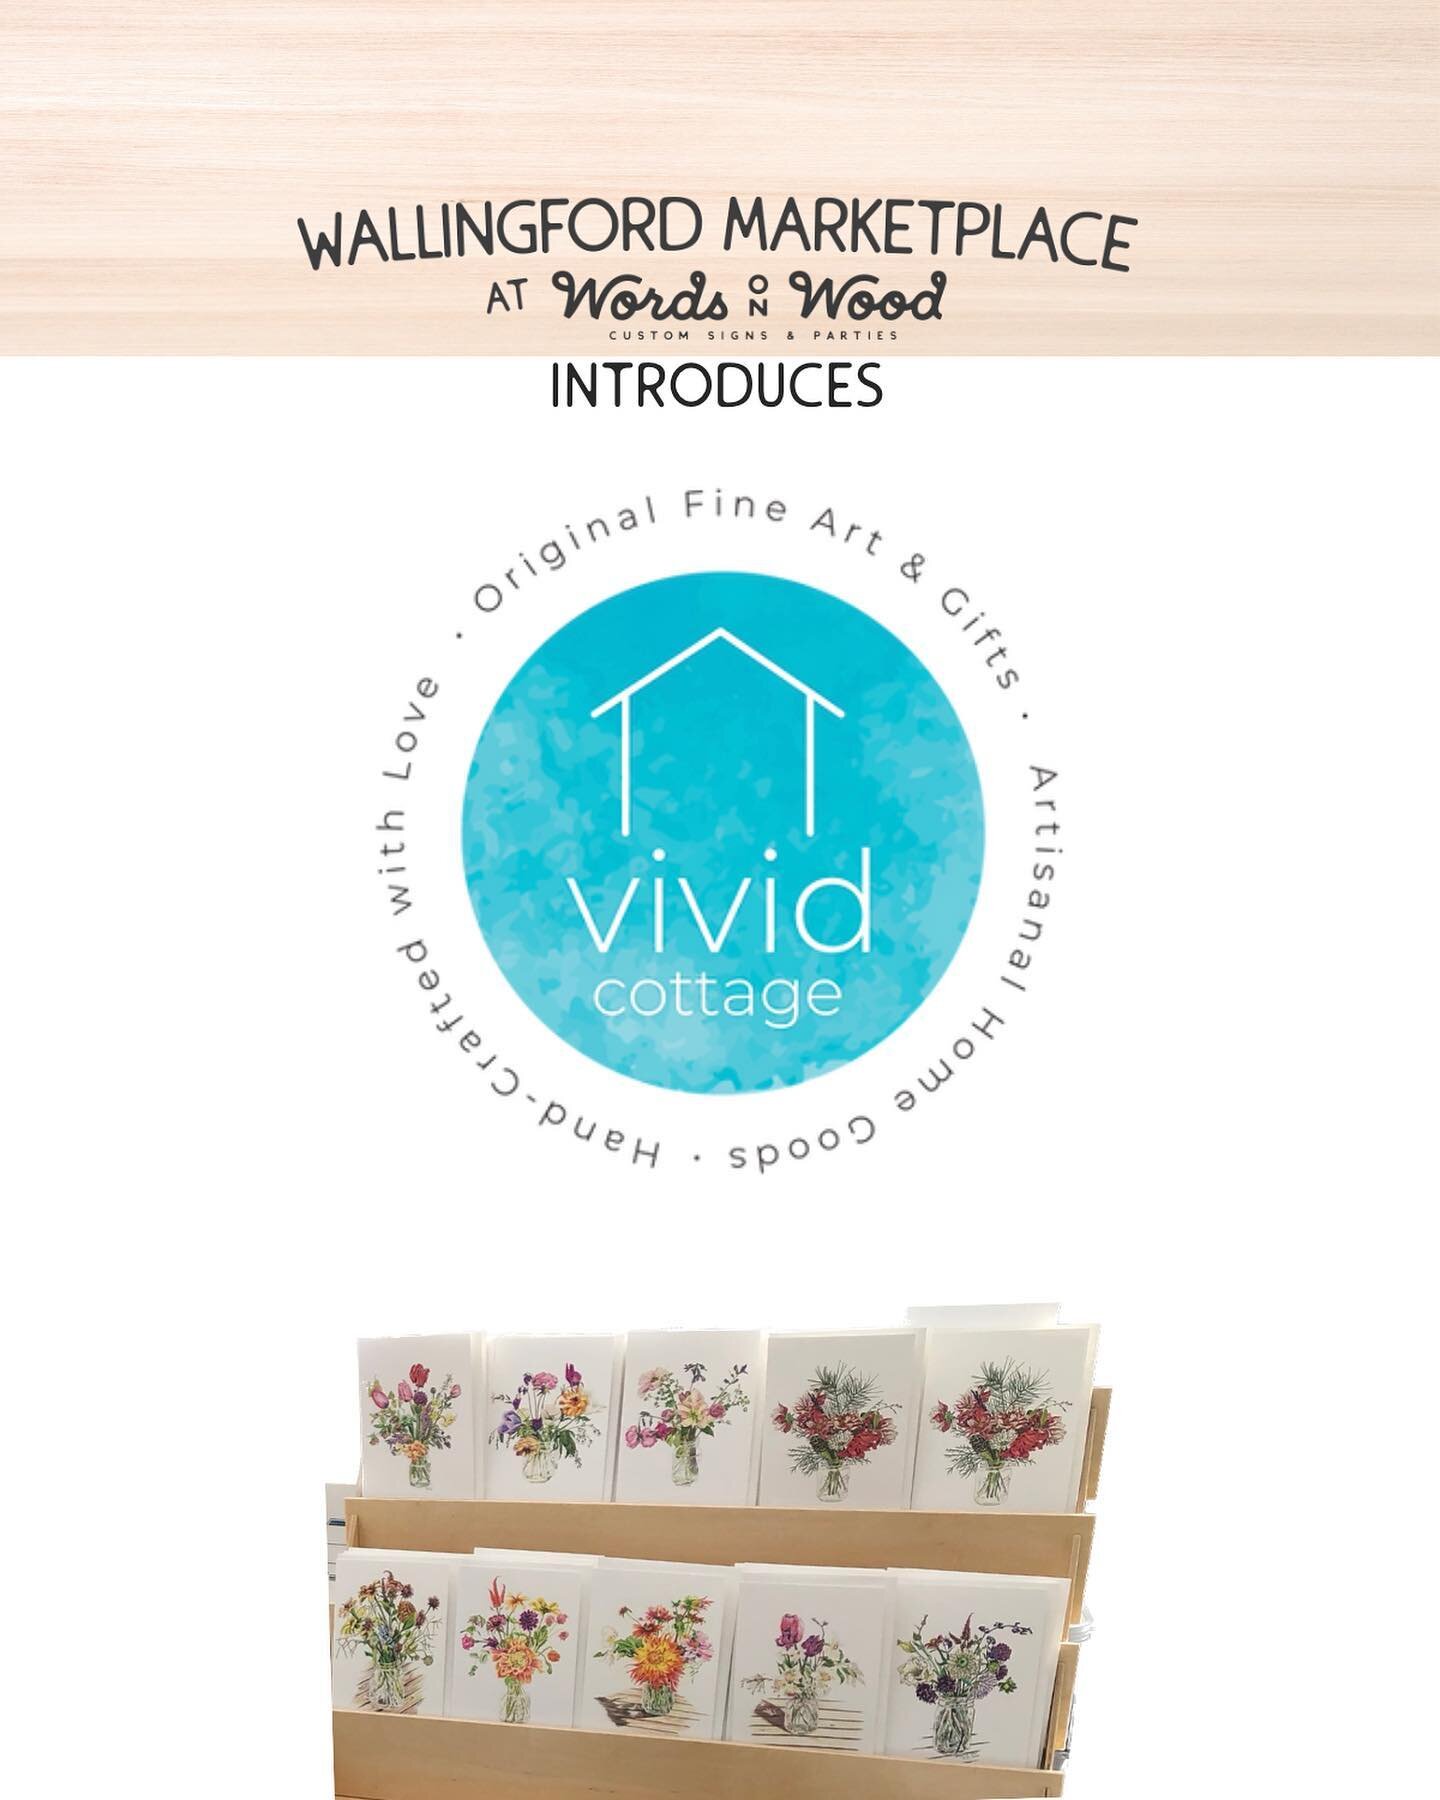 We are so excited to announce that Vivid Cottage @vividcottage will be part of the Wallingford Marketplace! Vivid Cottage is bringing her collection of fine art and artisanal home goods, all of which feature original artwork by Kerstin Rao. Kerstin i